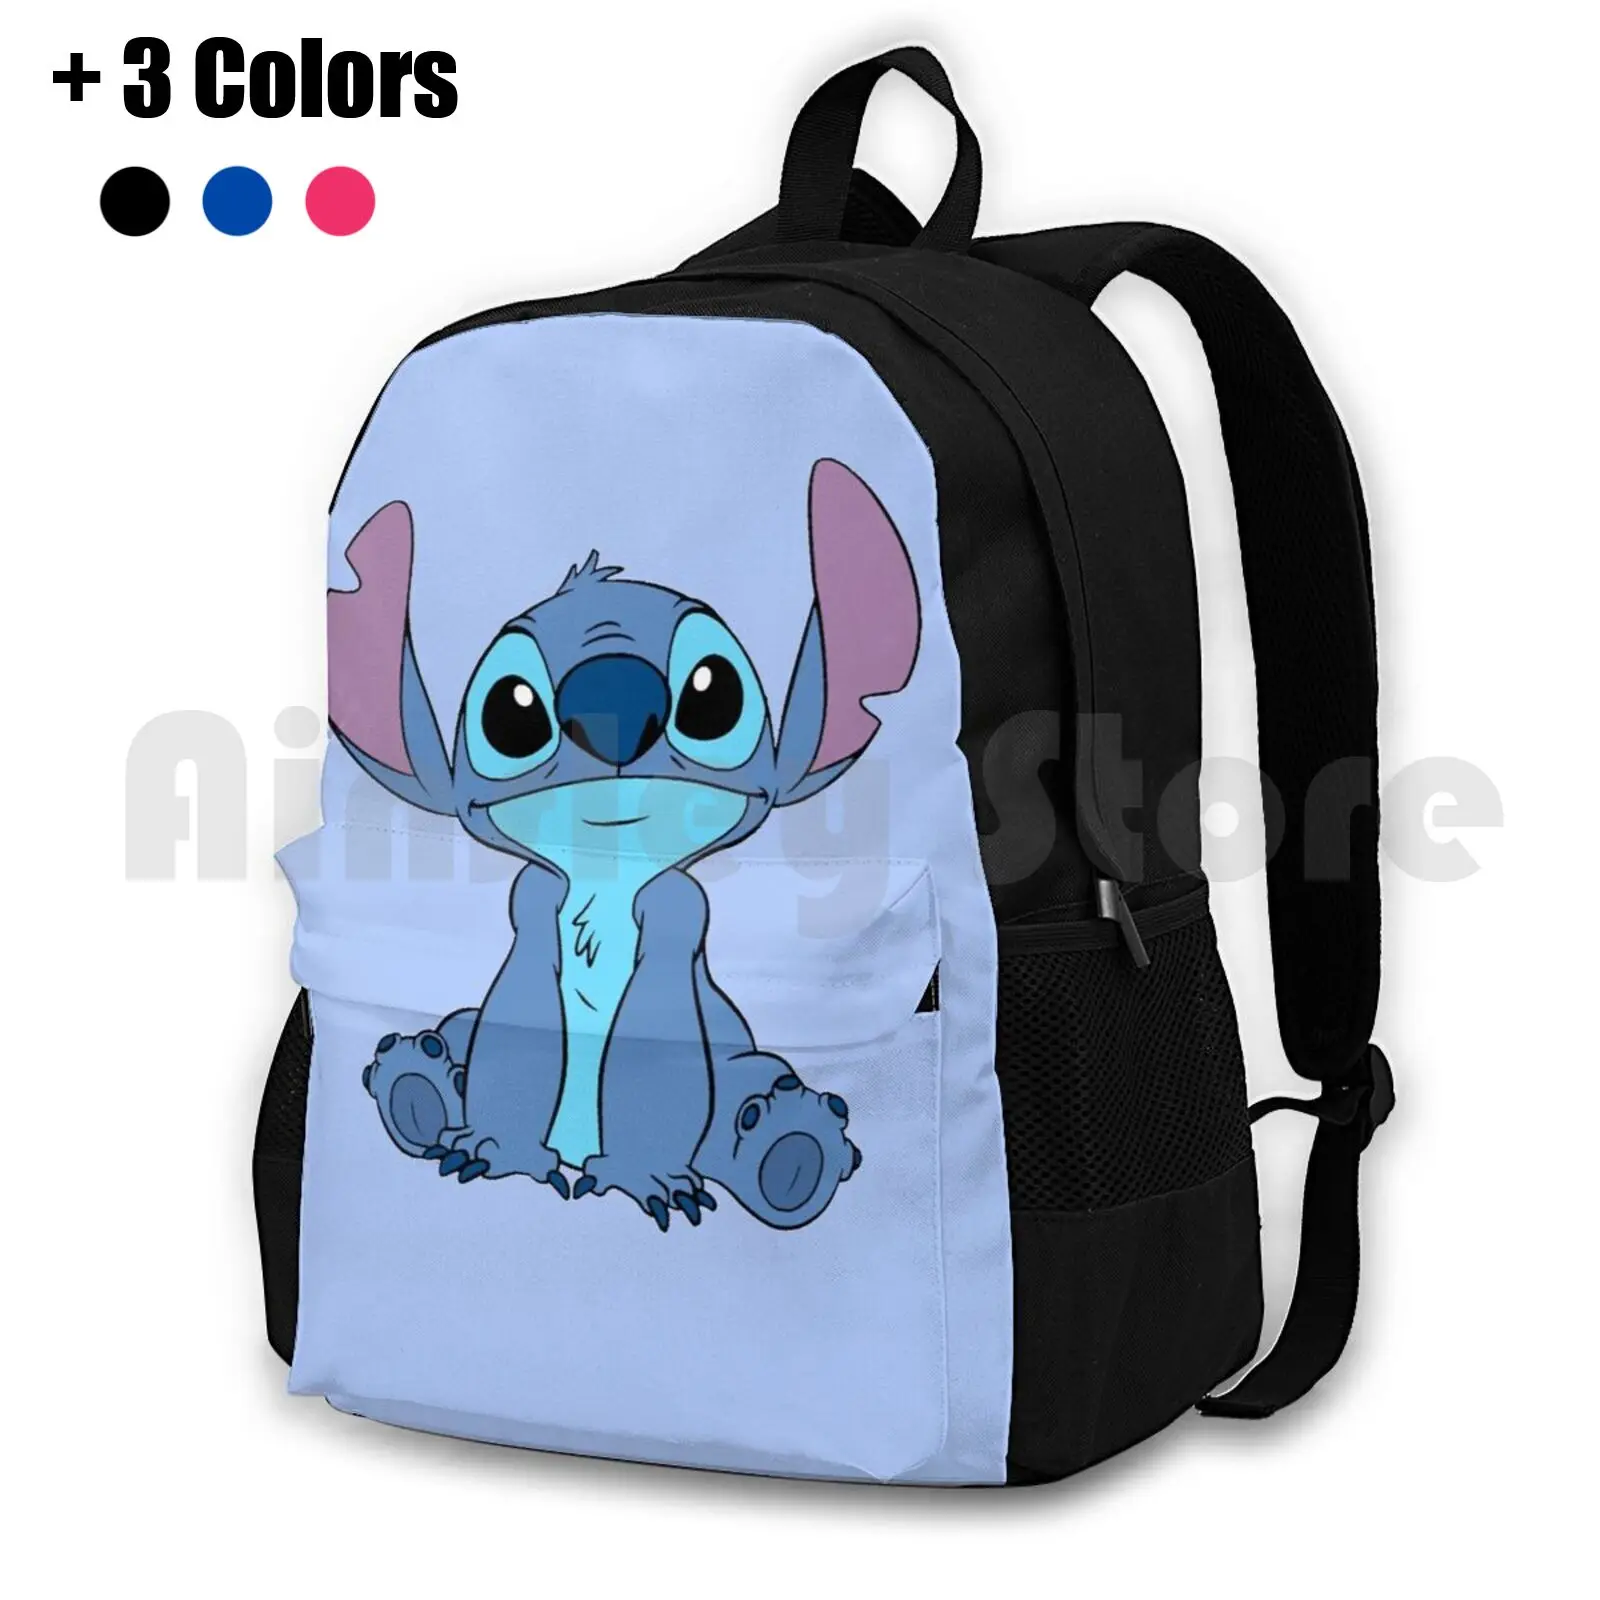 

Outdoor Hiking Backpack Waterproof Camping Travel Lilo And Cute Lilo Blue Tumblr Family Hawaii Love Adorable Flower Music